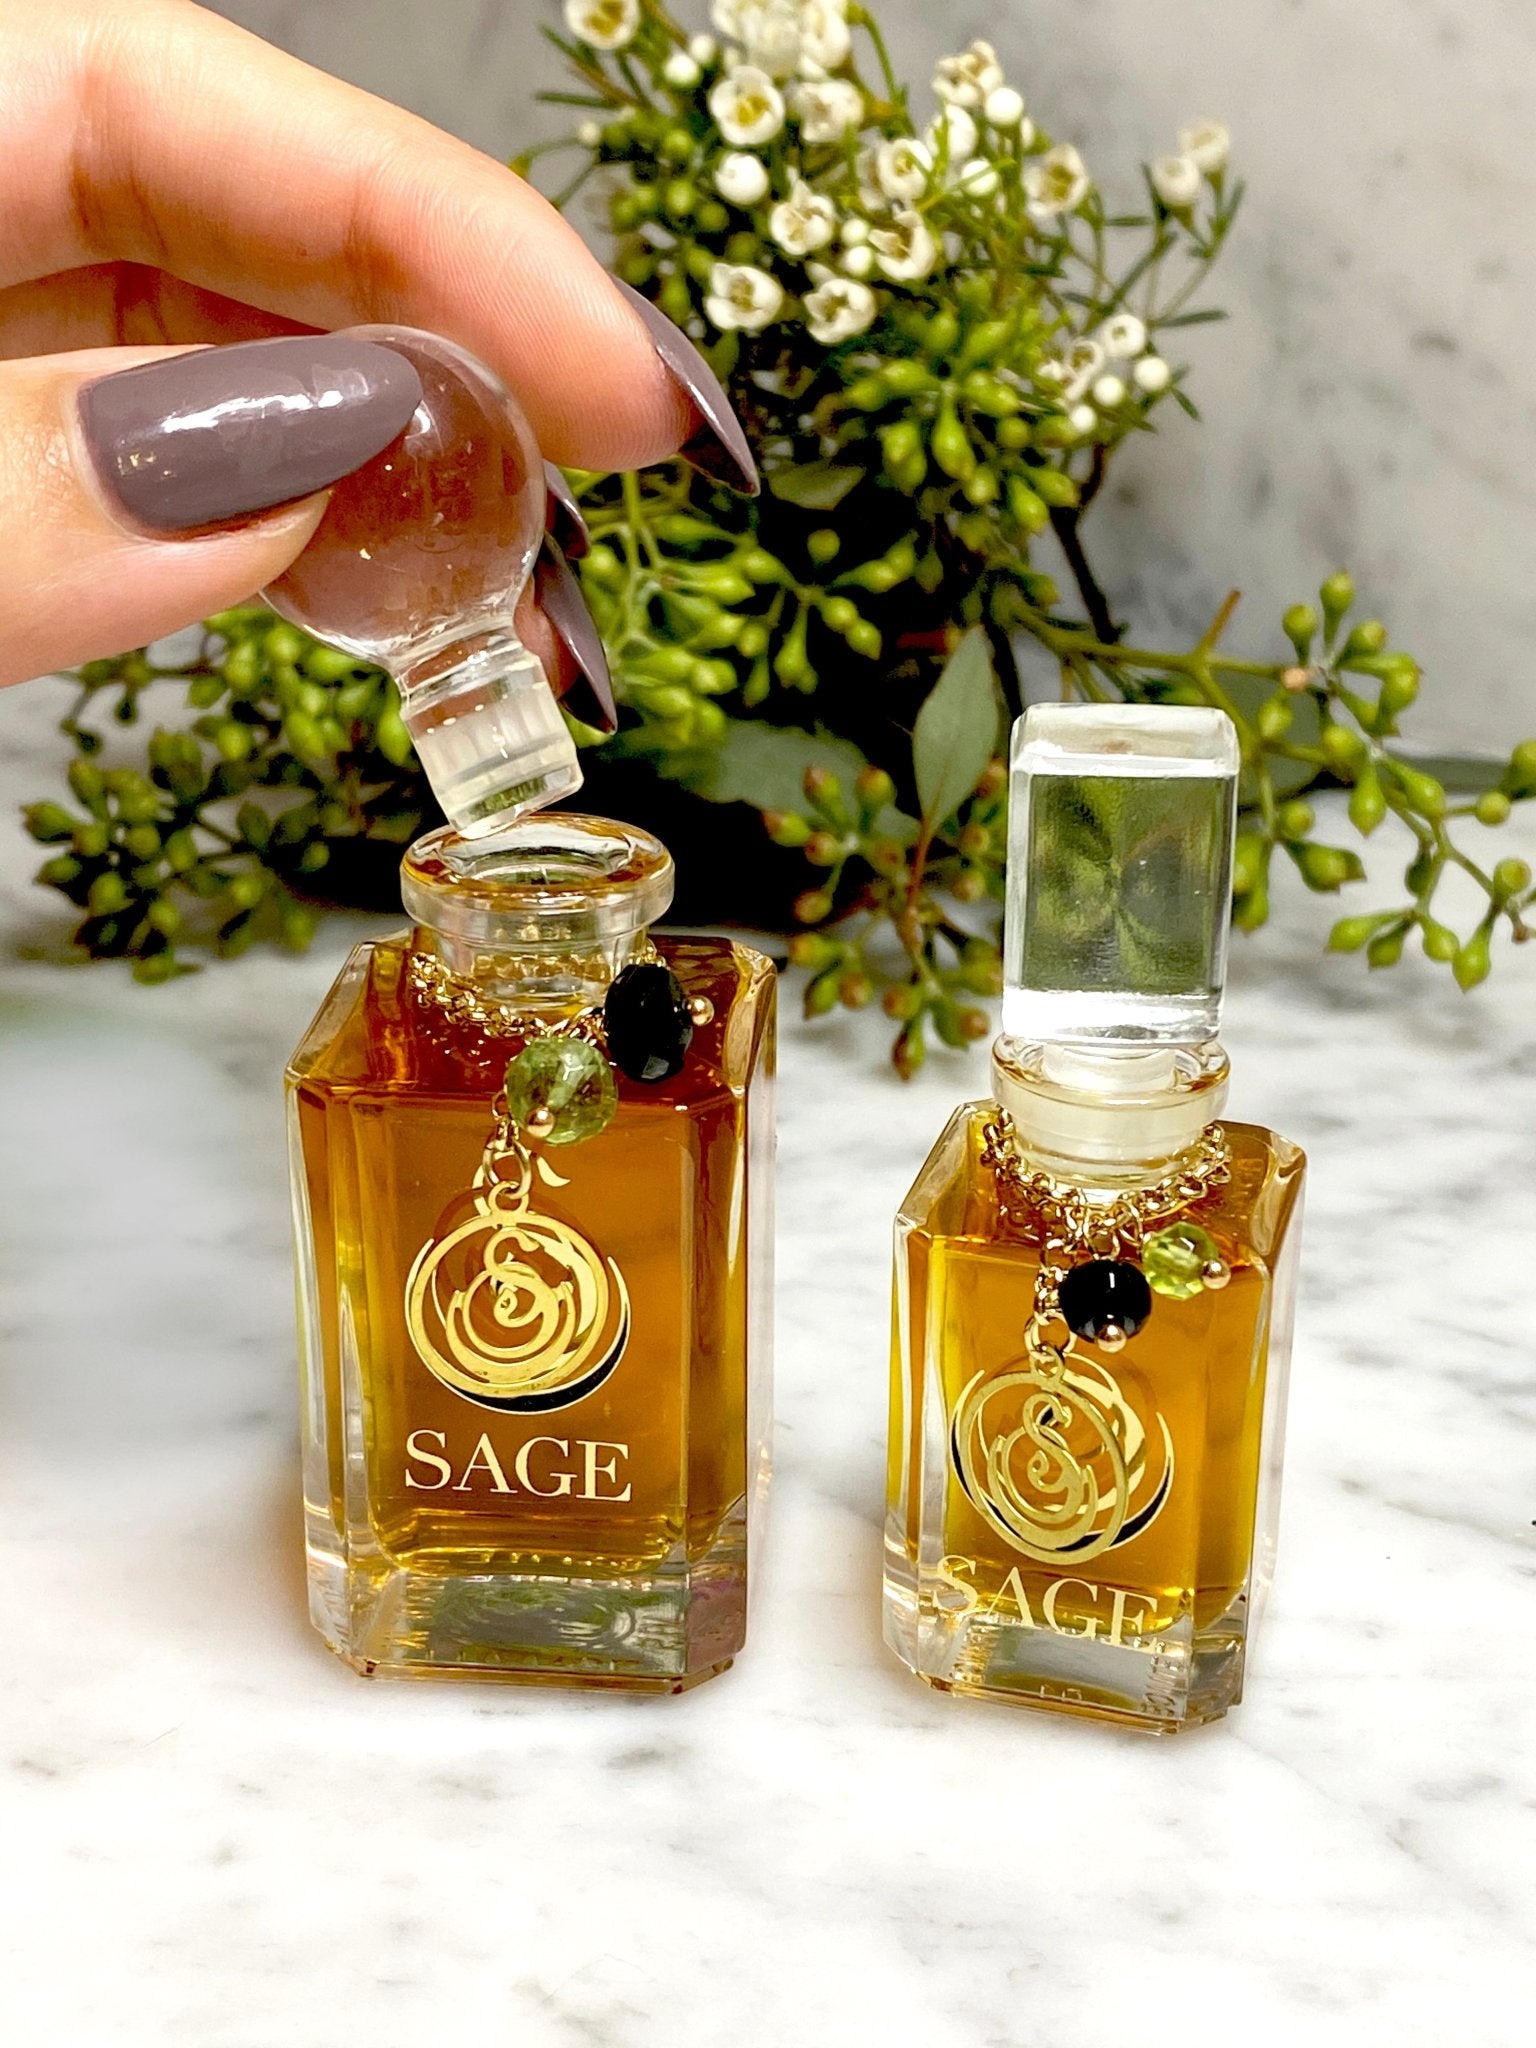 Onyx &amp; Peridot Blend Vanity Bottle by Sage, Pure Perfume Oil - The Sage Lifestyle